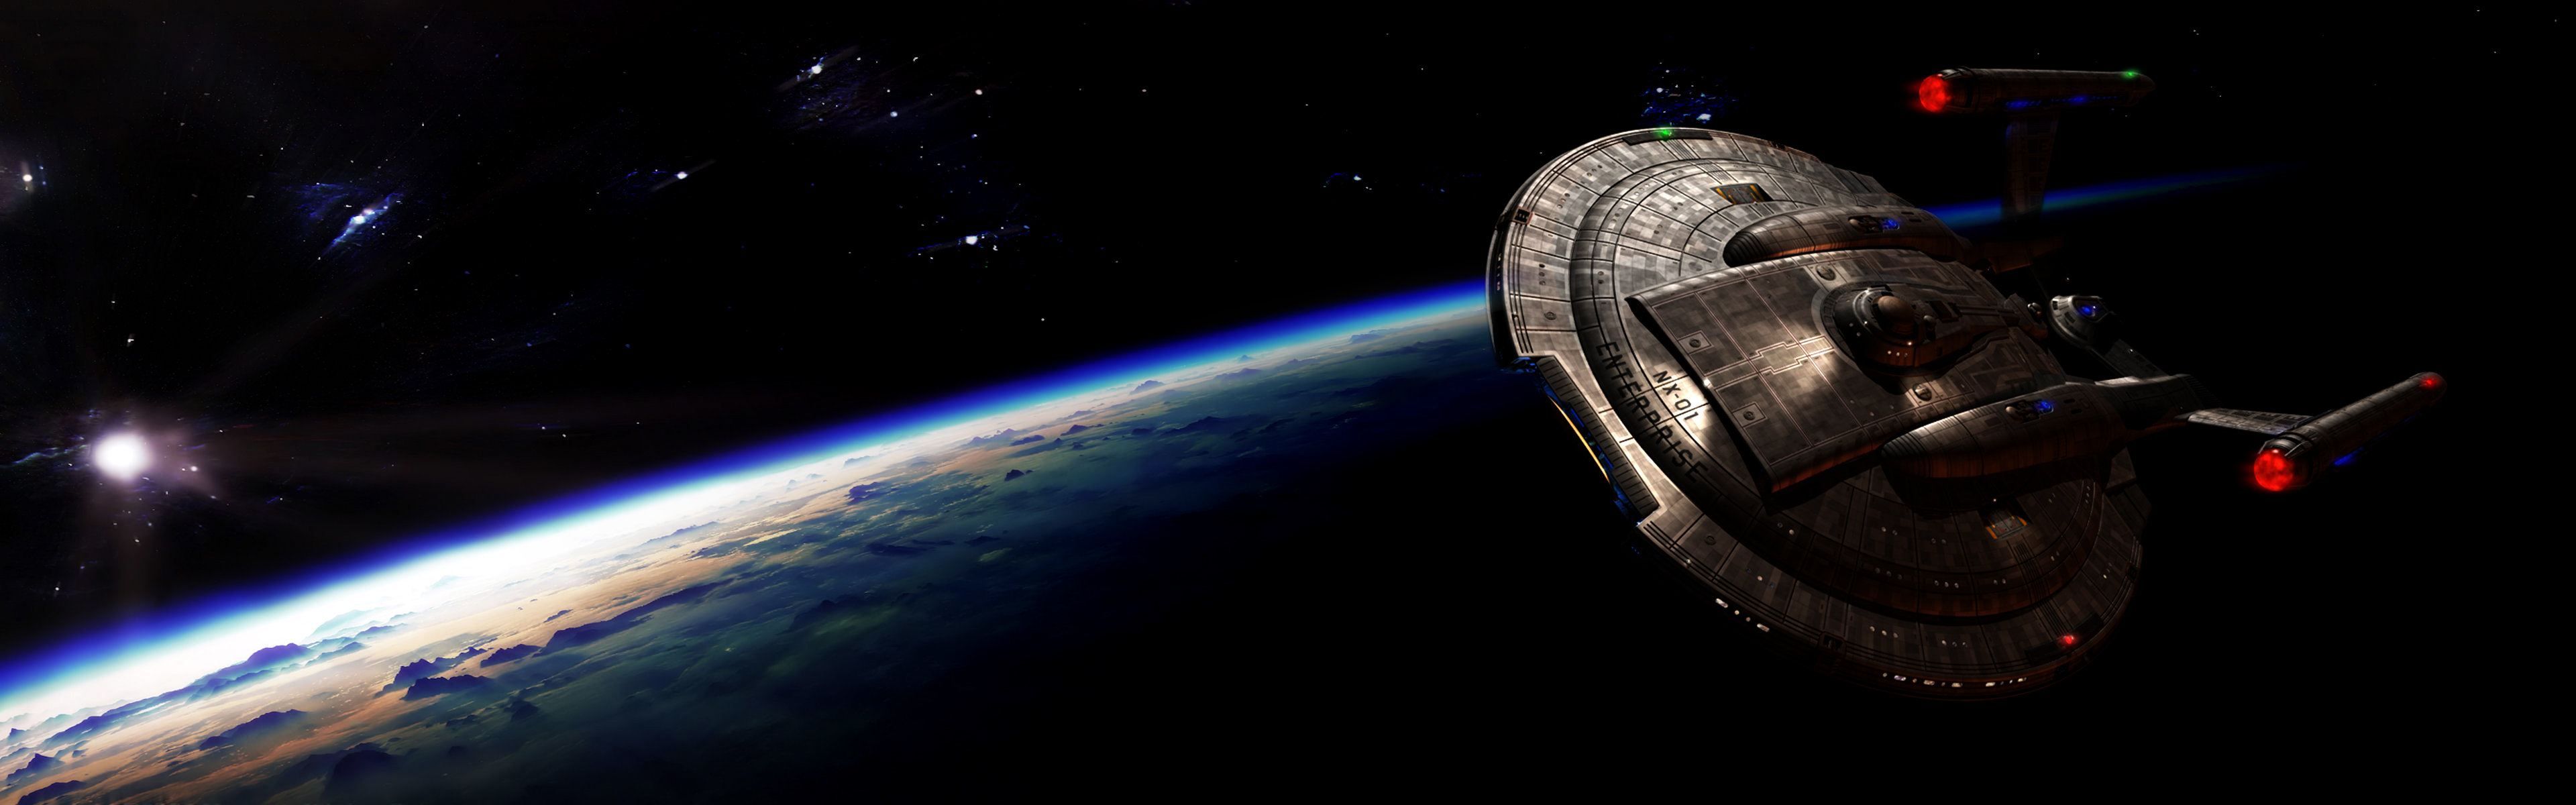 Download dual screen 3840x1200 Star Trek computer background ID:388852 for free